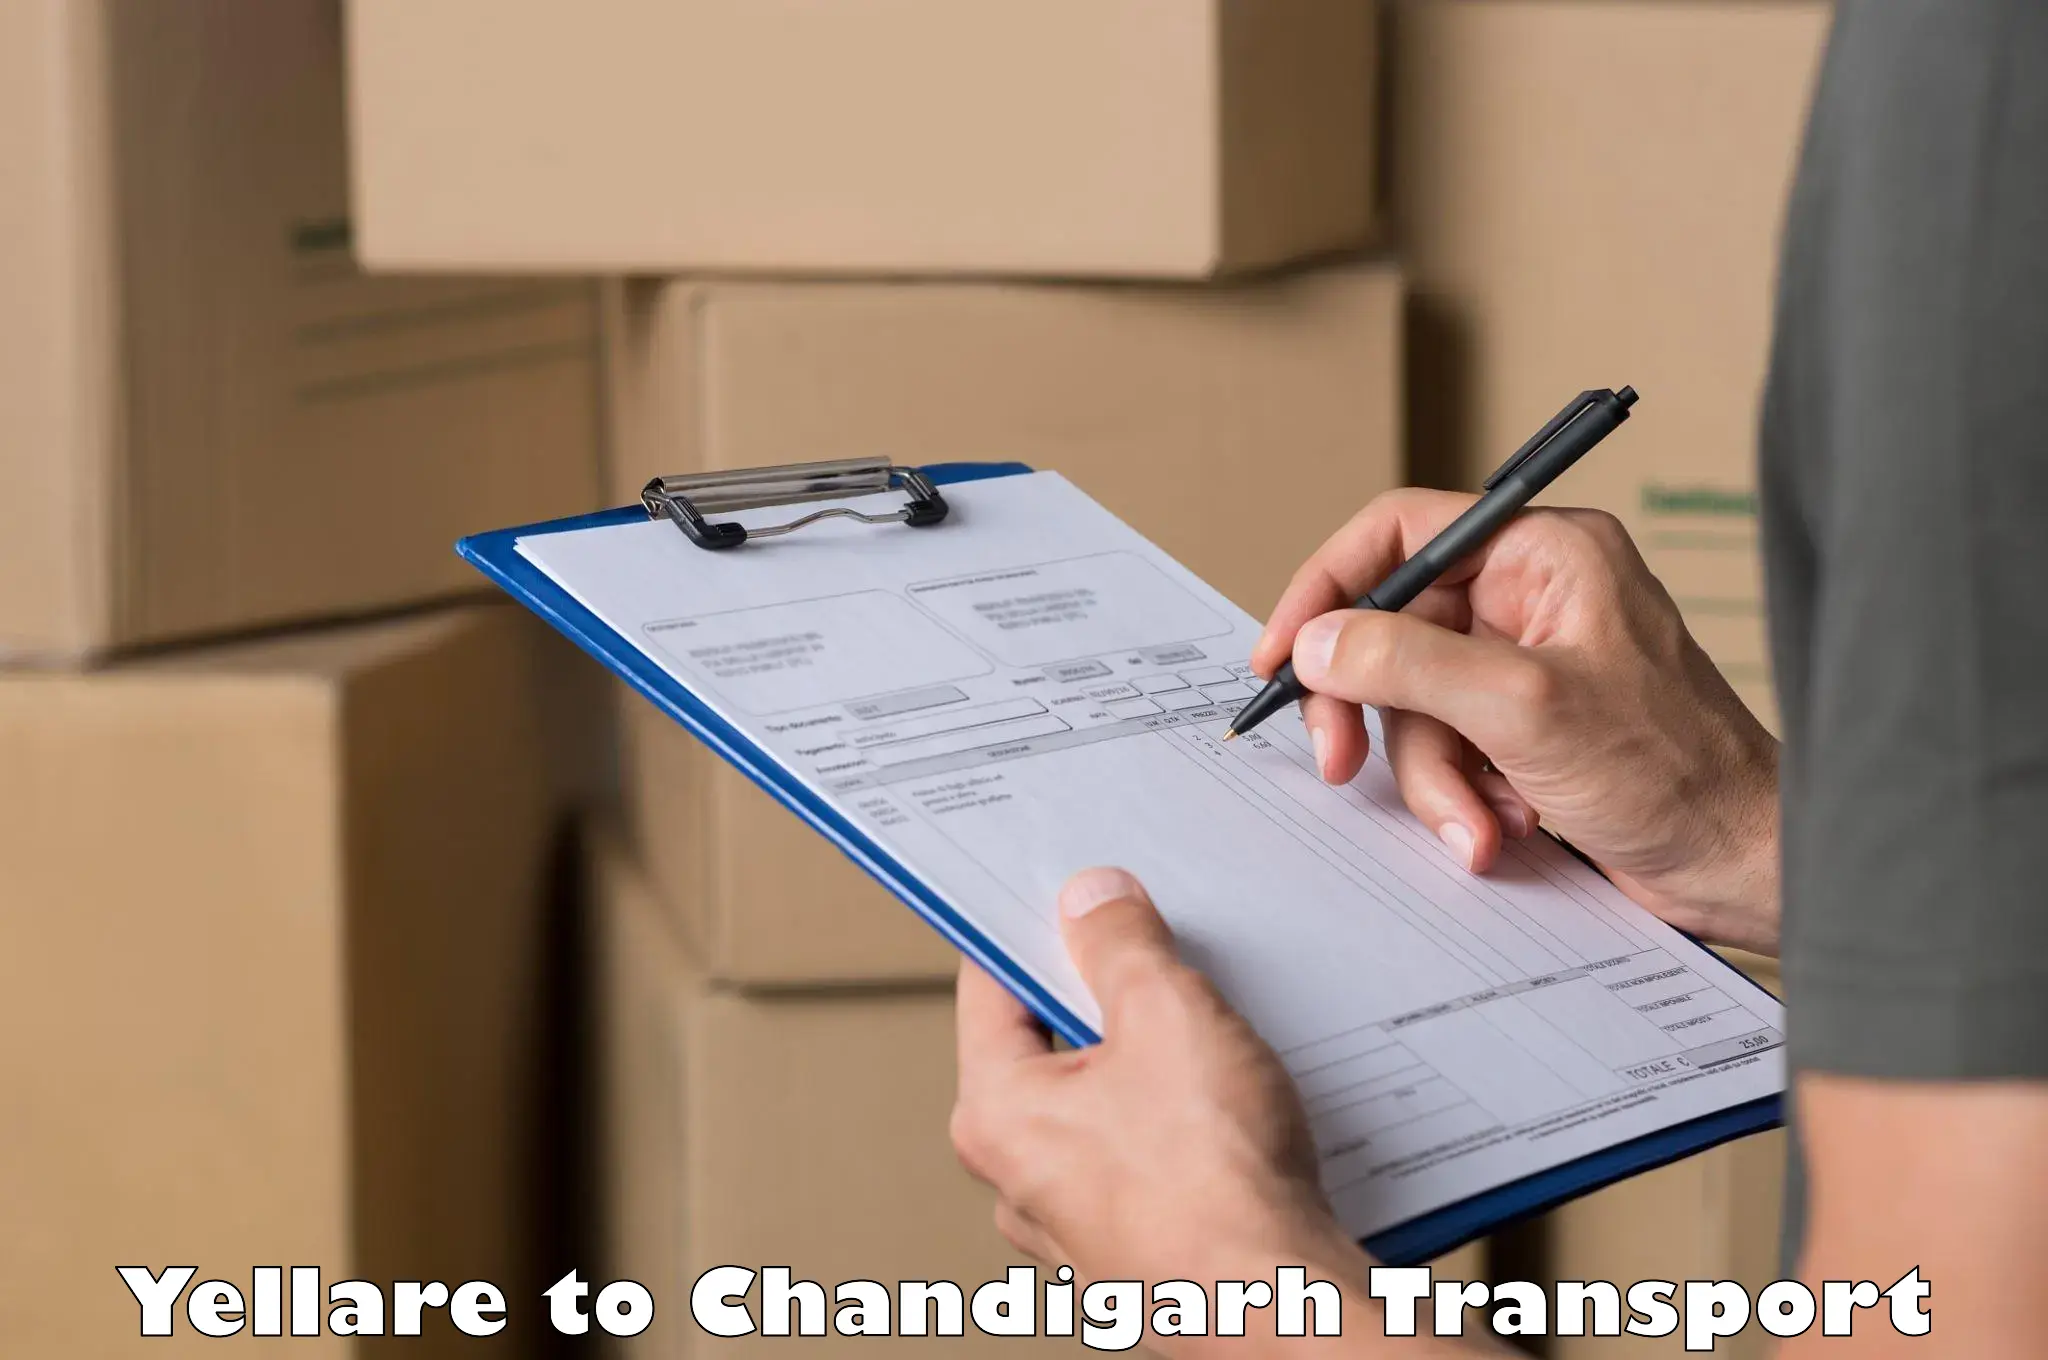 Parcel transport services Yellare to Chandigarh